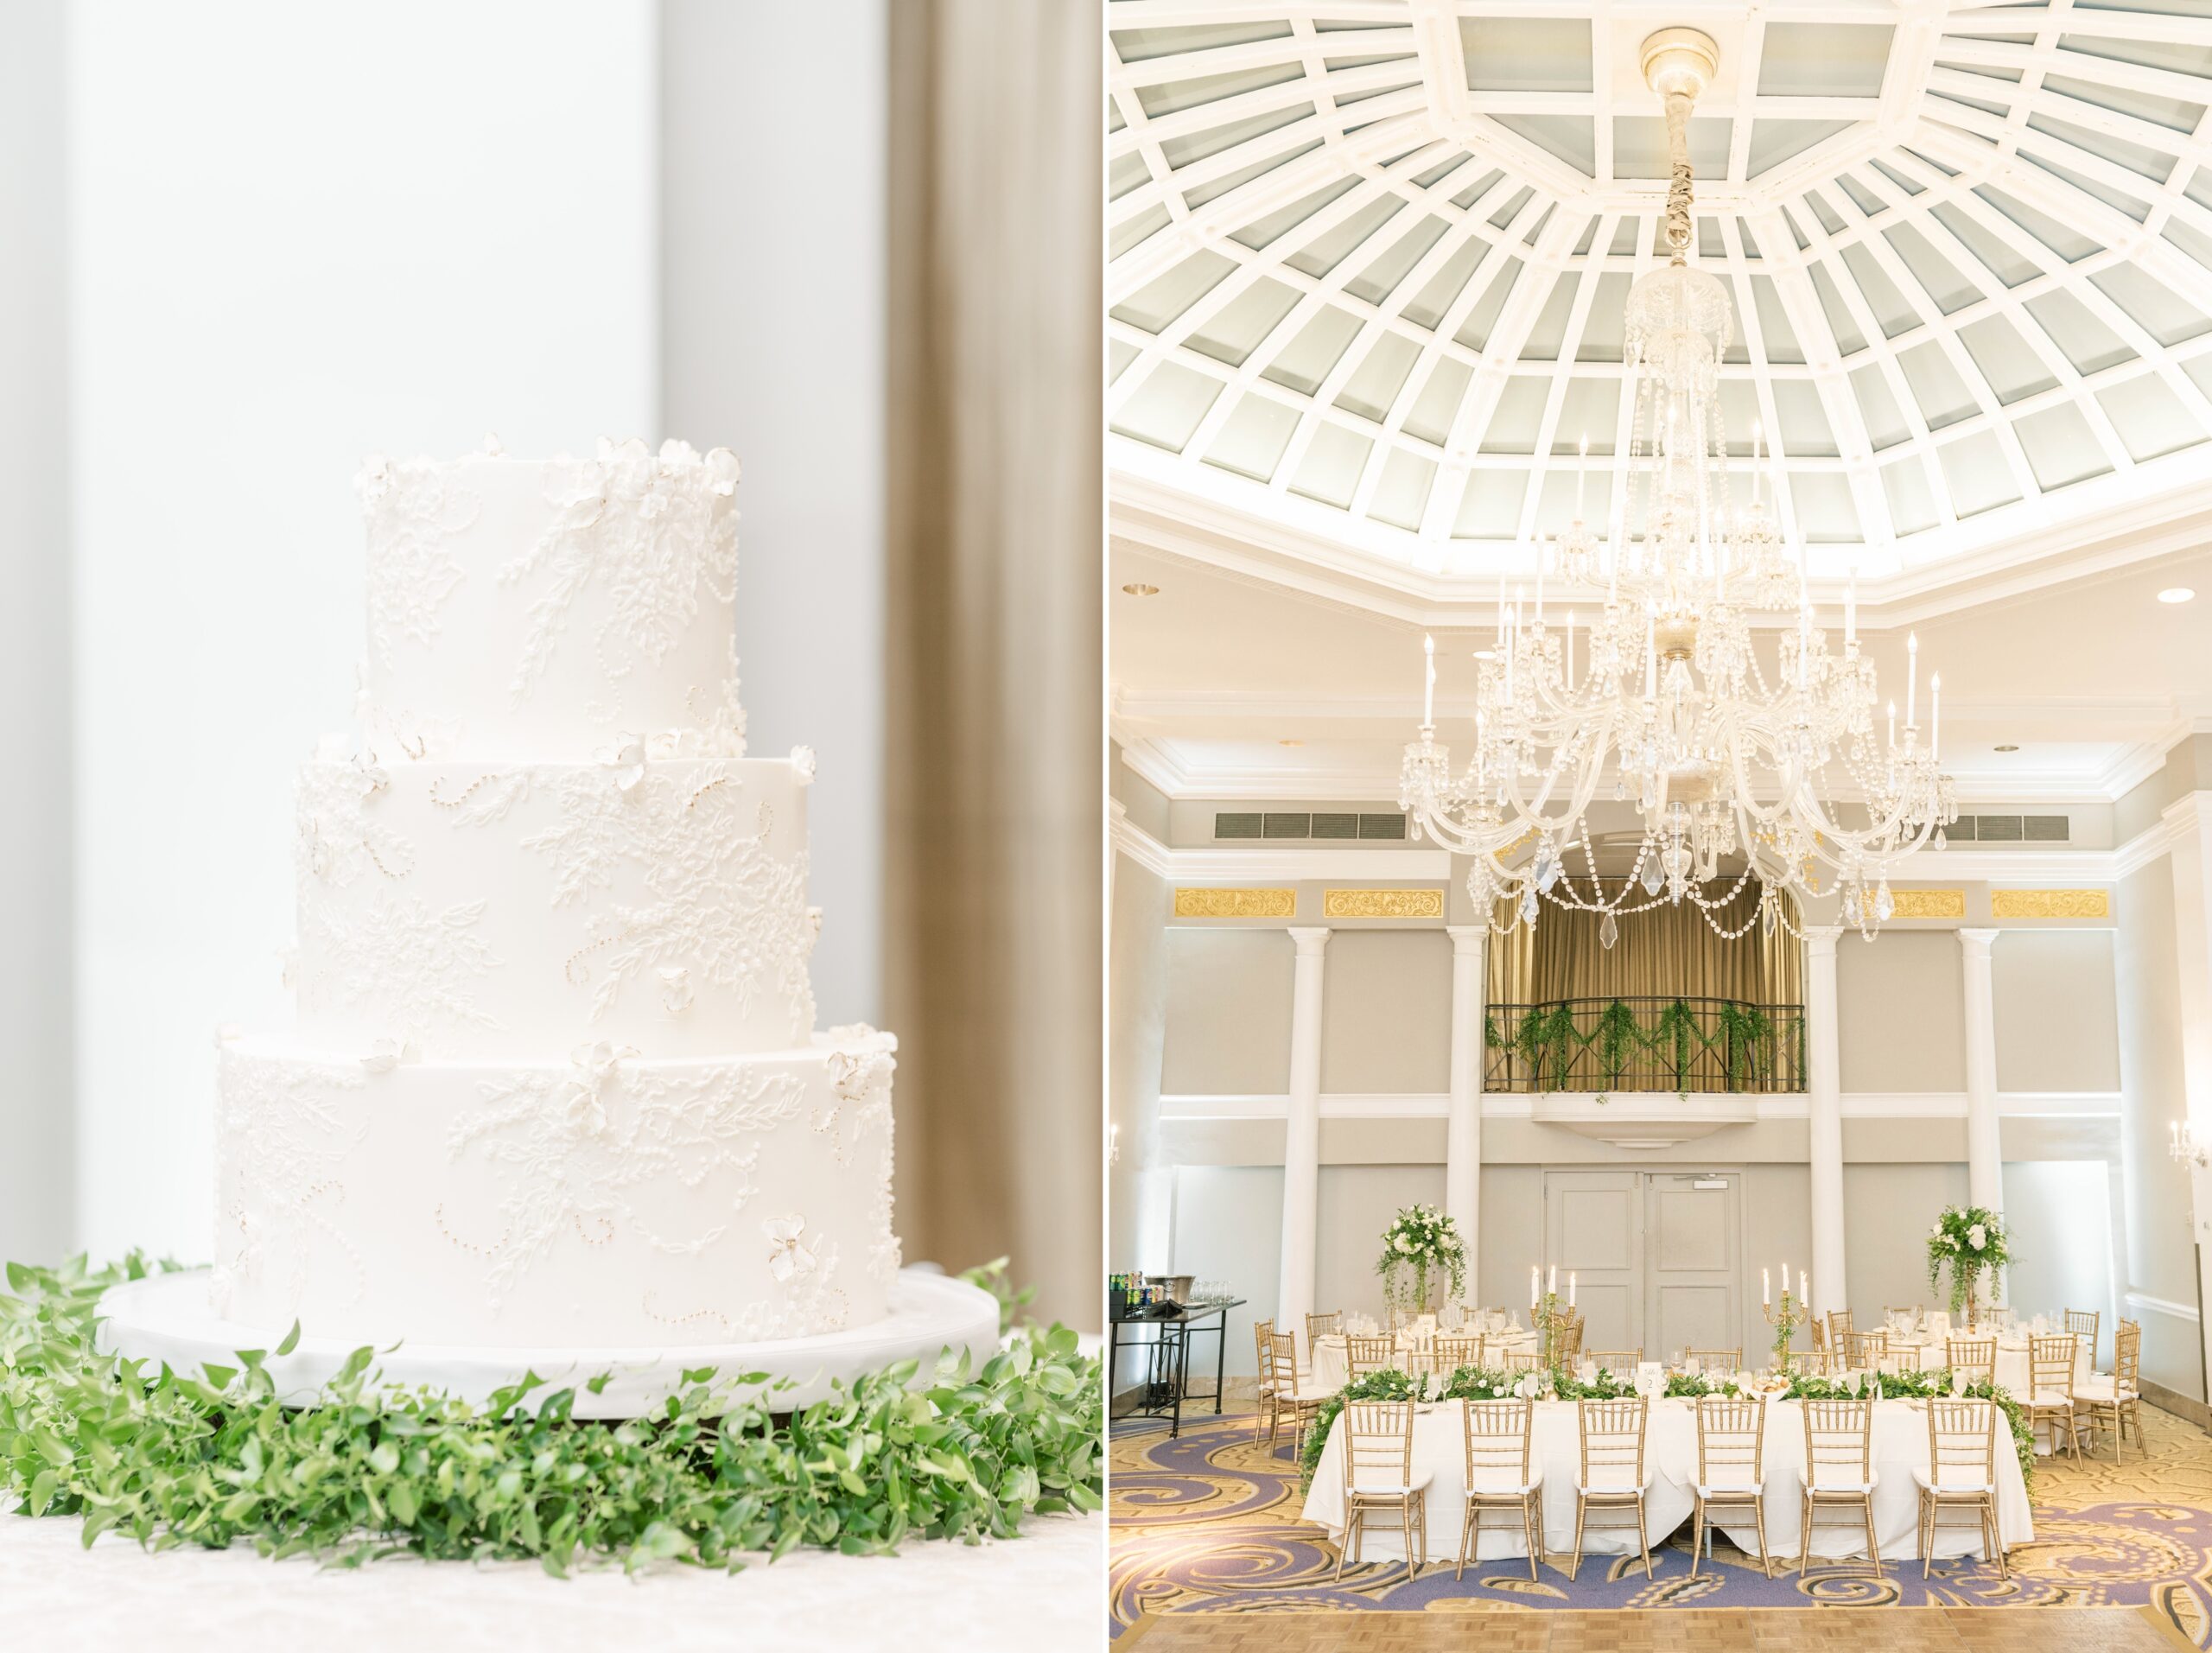 An intimate winter wedding in Washington, DC at the iconic St. Matthews Cathedral and Mayflower Hotel.